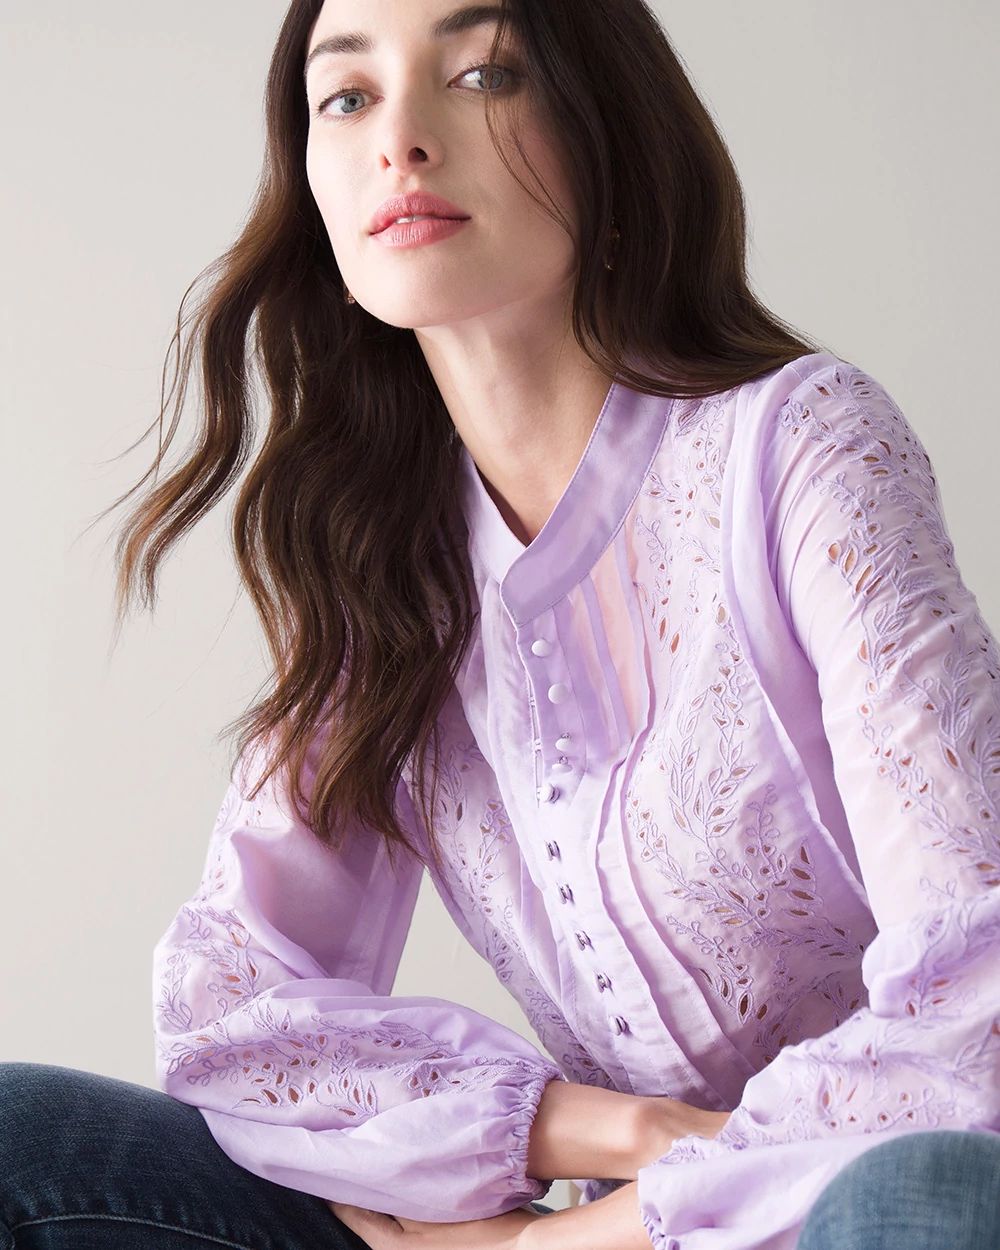 EMBROIDERED SILK/COTTON VOILE BLOUSE click to view larger image.